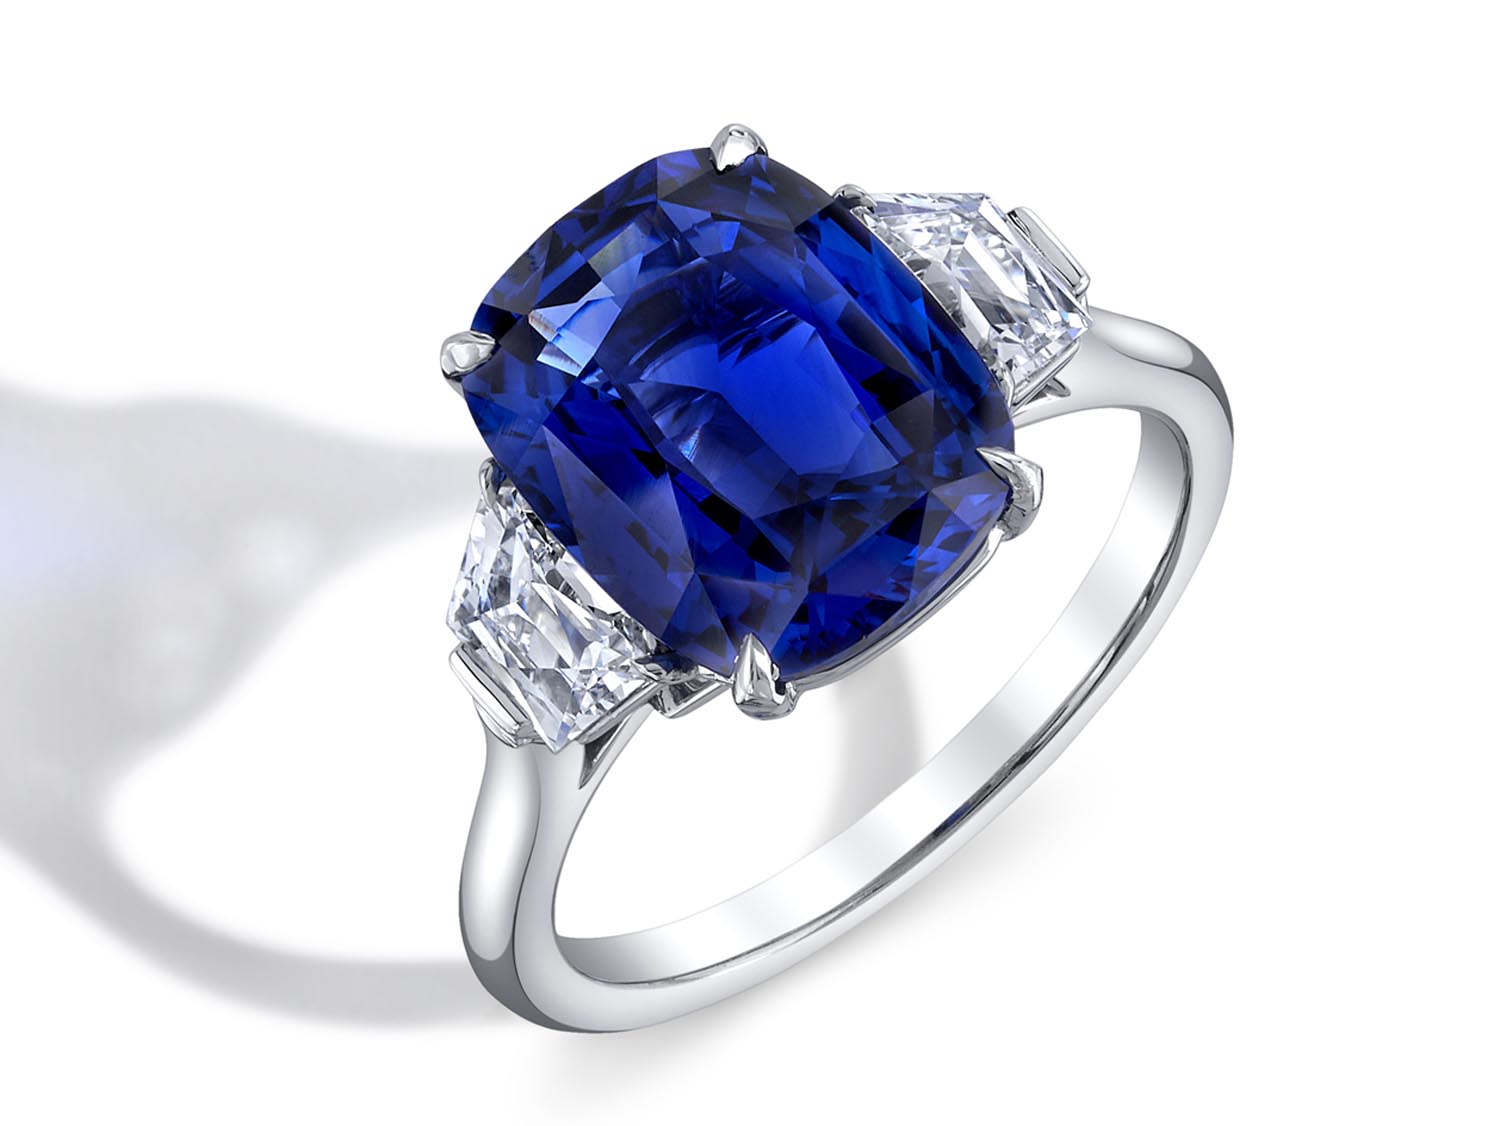 2022 Sapphire Engagement Rings Trend: 12 Styles To Try